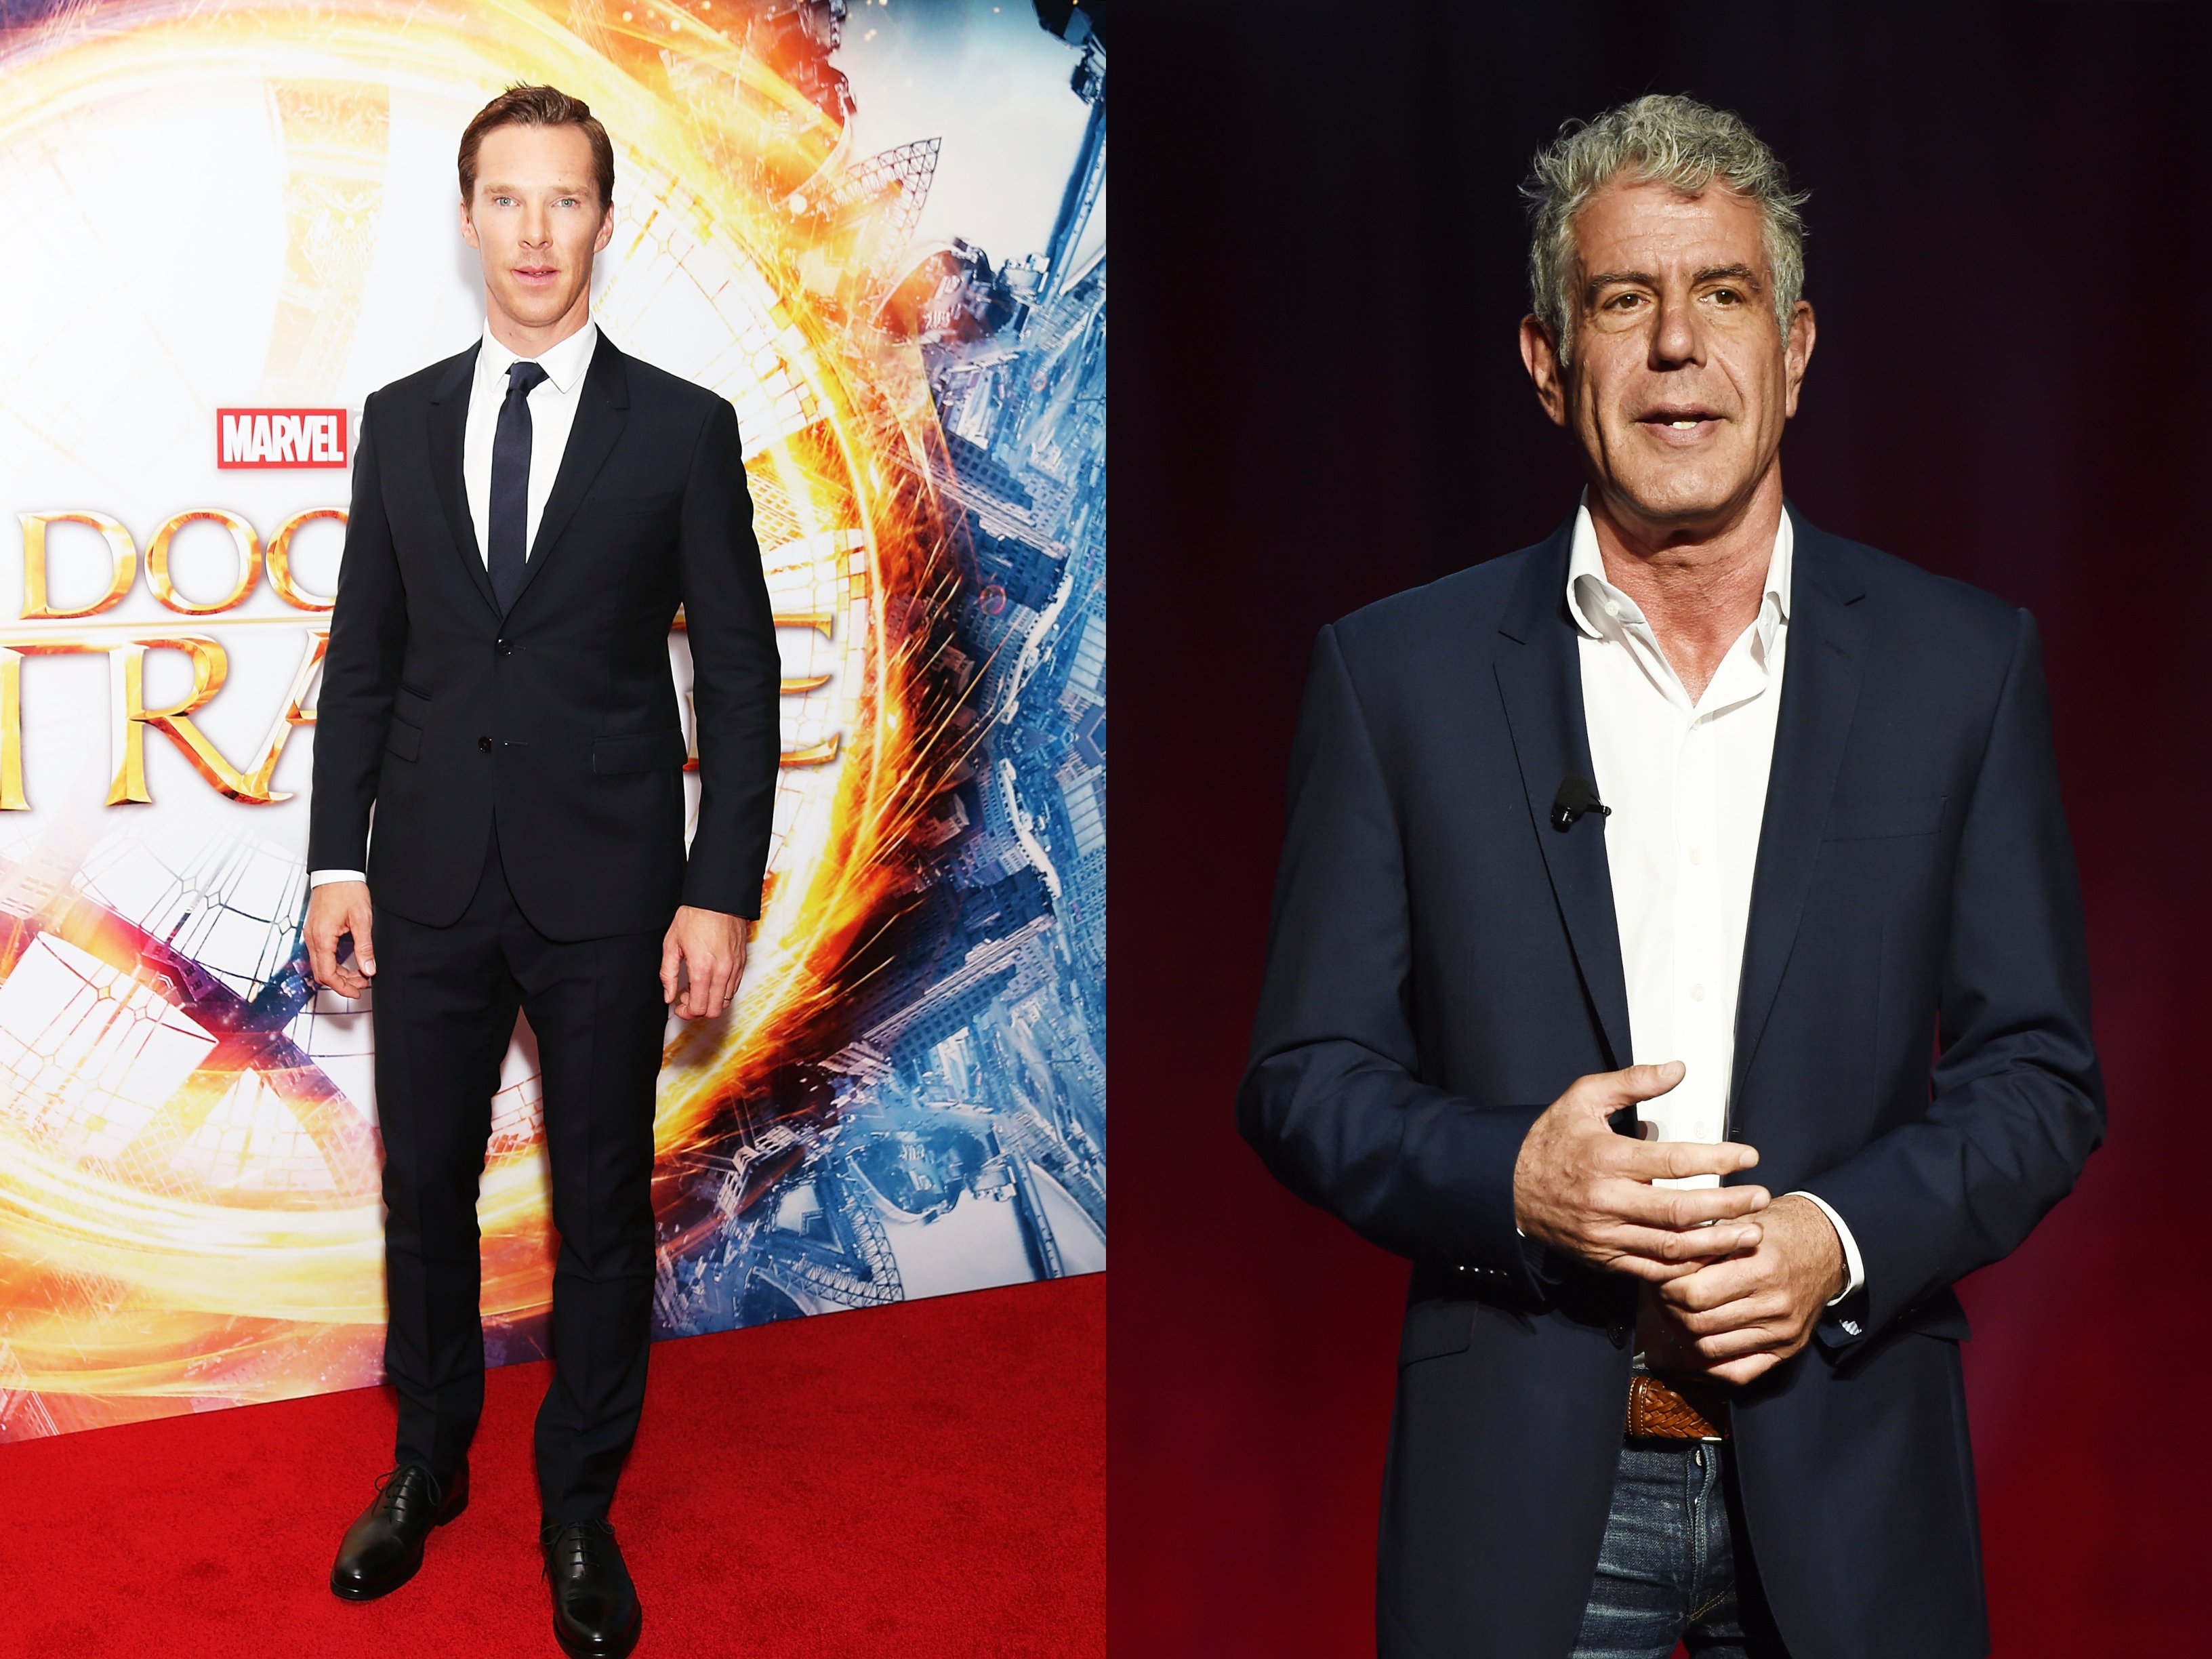 Benedict Cumberbatch attends the fan screening event for ‘Doctor Strange’ on October 24, 2016 and Anthony Bourdain at the Turner Upfront 2016 show at The Theater at Madison Square Garden in New York City